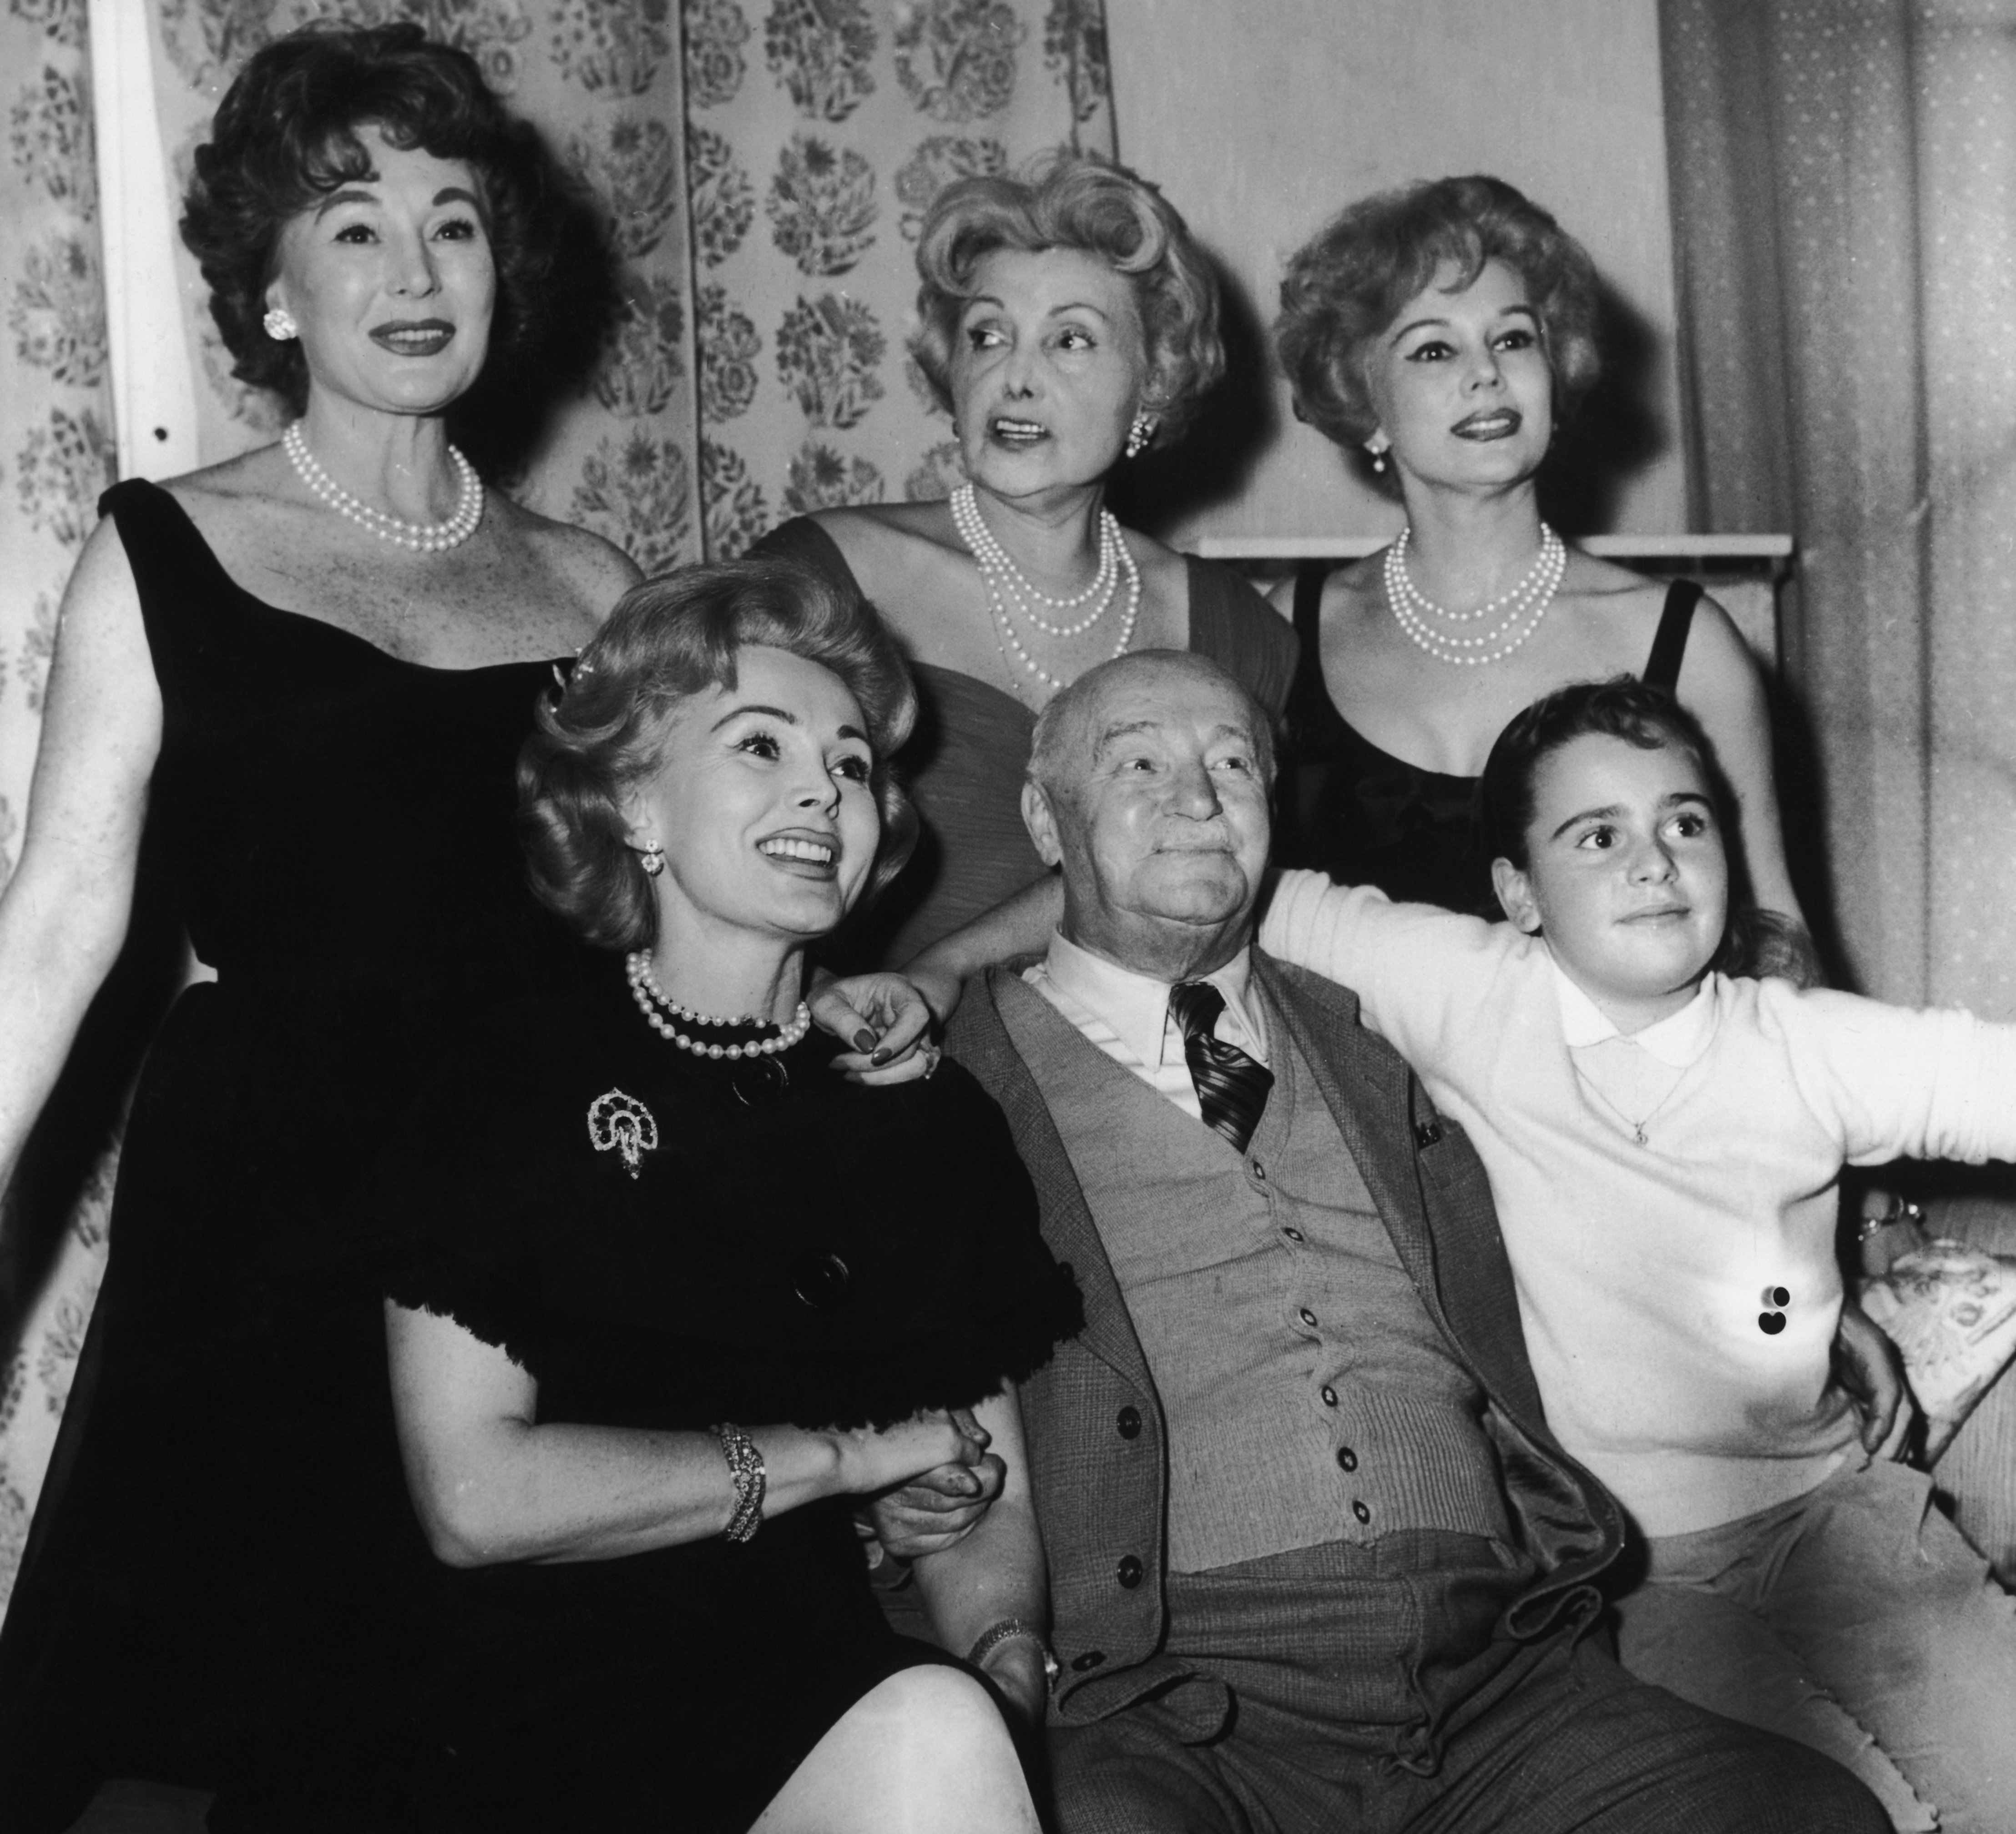 Zsa Zsa Gabor and her family: sisters Magda and Eva, mother Jolie, father Vilmos, and daughter Francesca circa 1958 | Source: Getty Images